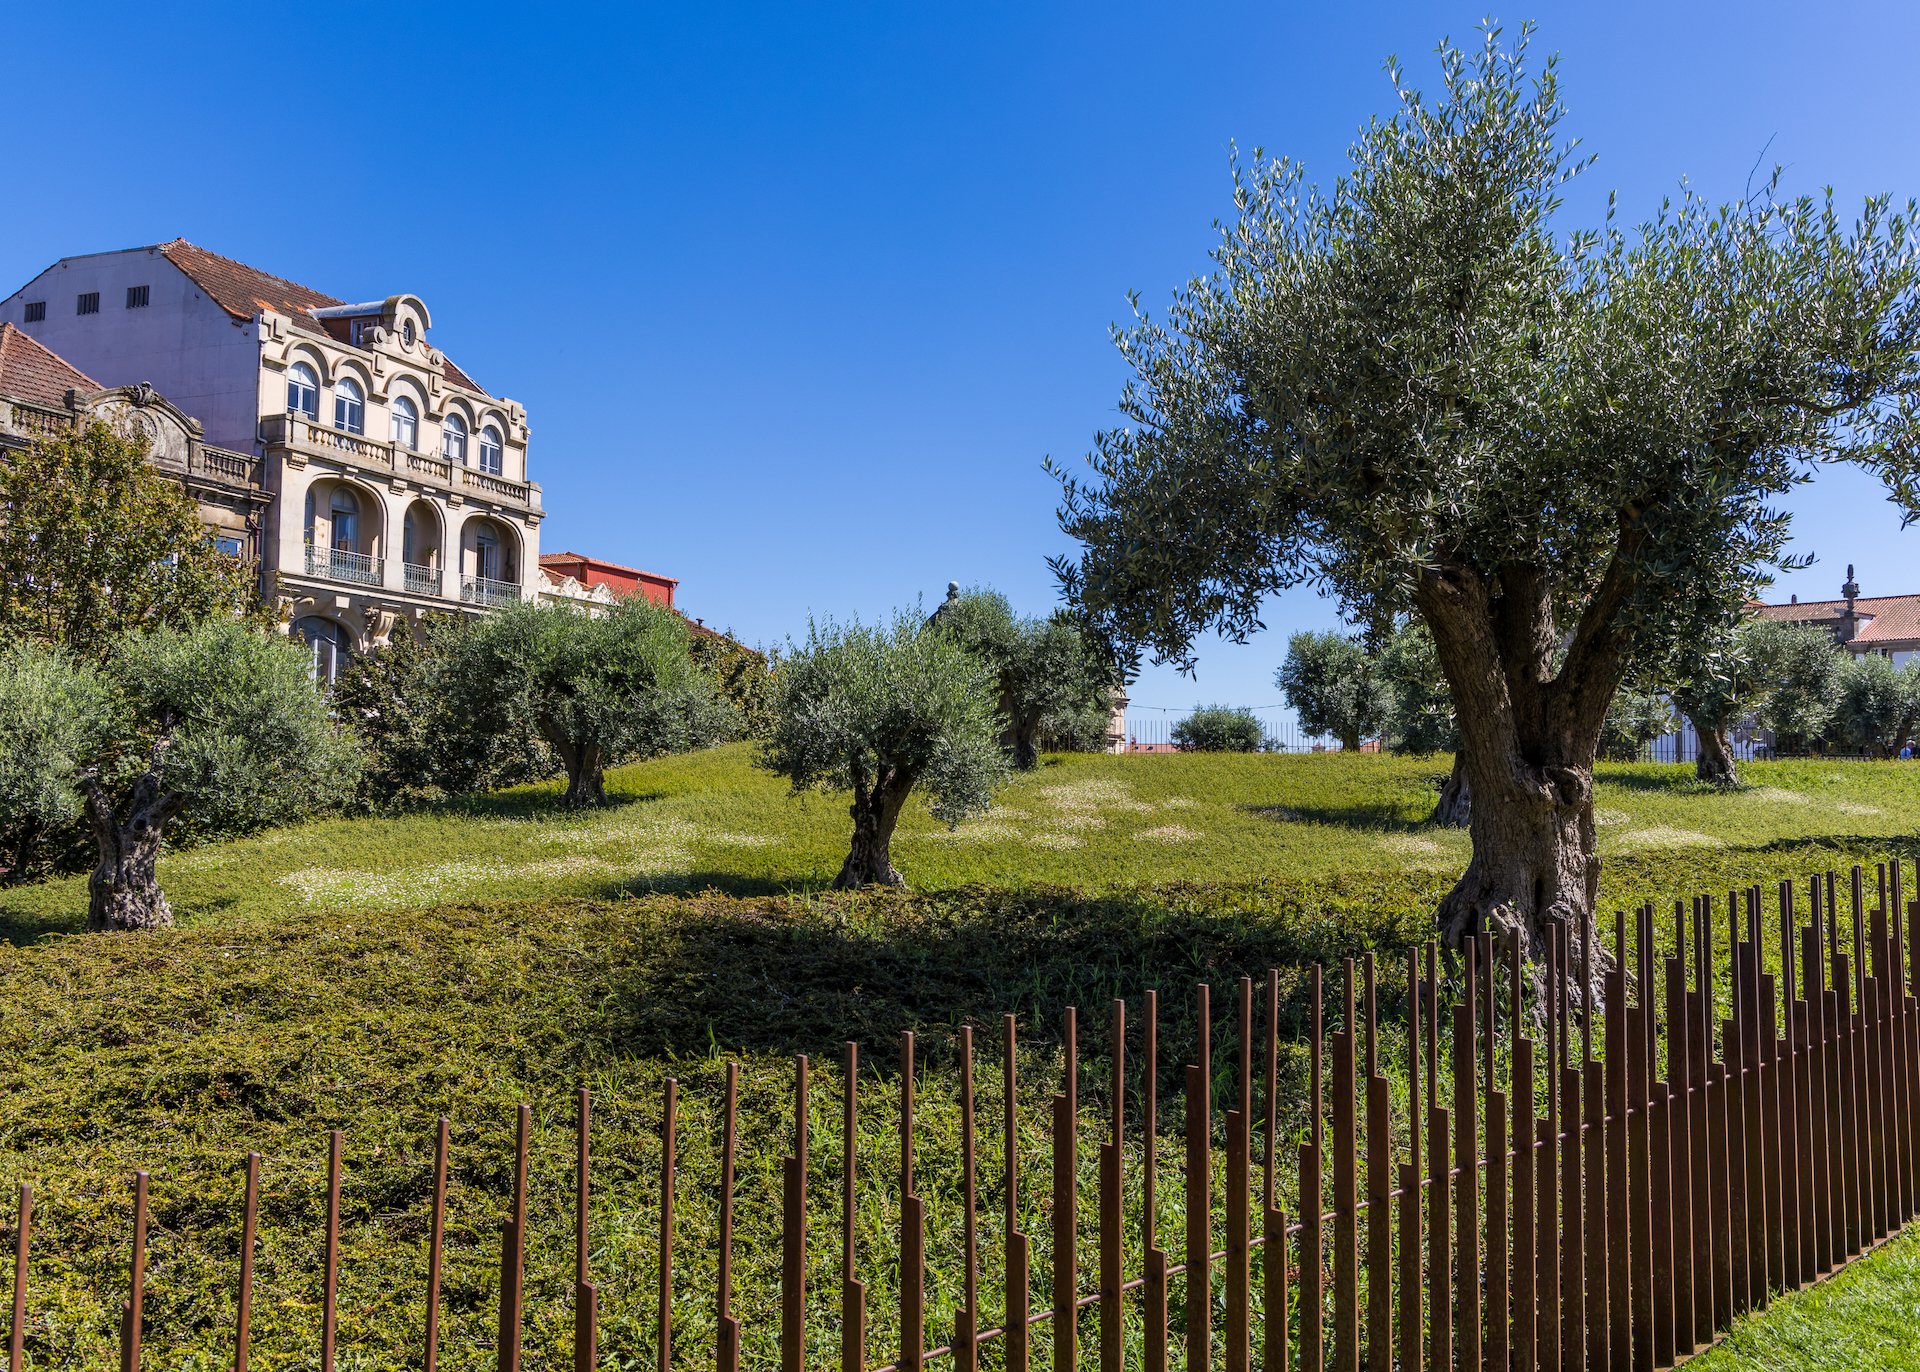  They planted this olive grove in the center of town, over top of another build.   https://livingarchitecturemonitor.com/articles/a-historic-square-revitalized-with-an-olive-grove-green-roof-in-porto-portugal-su21   